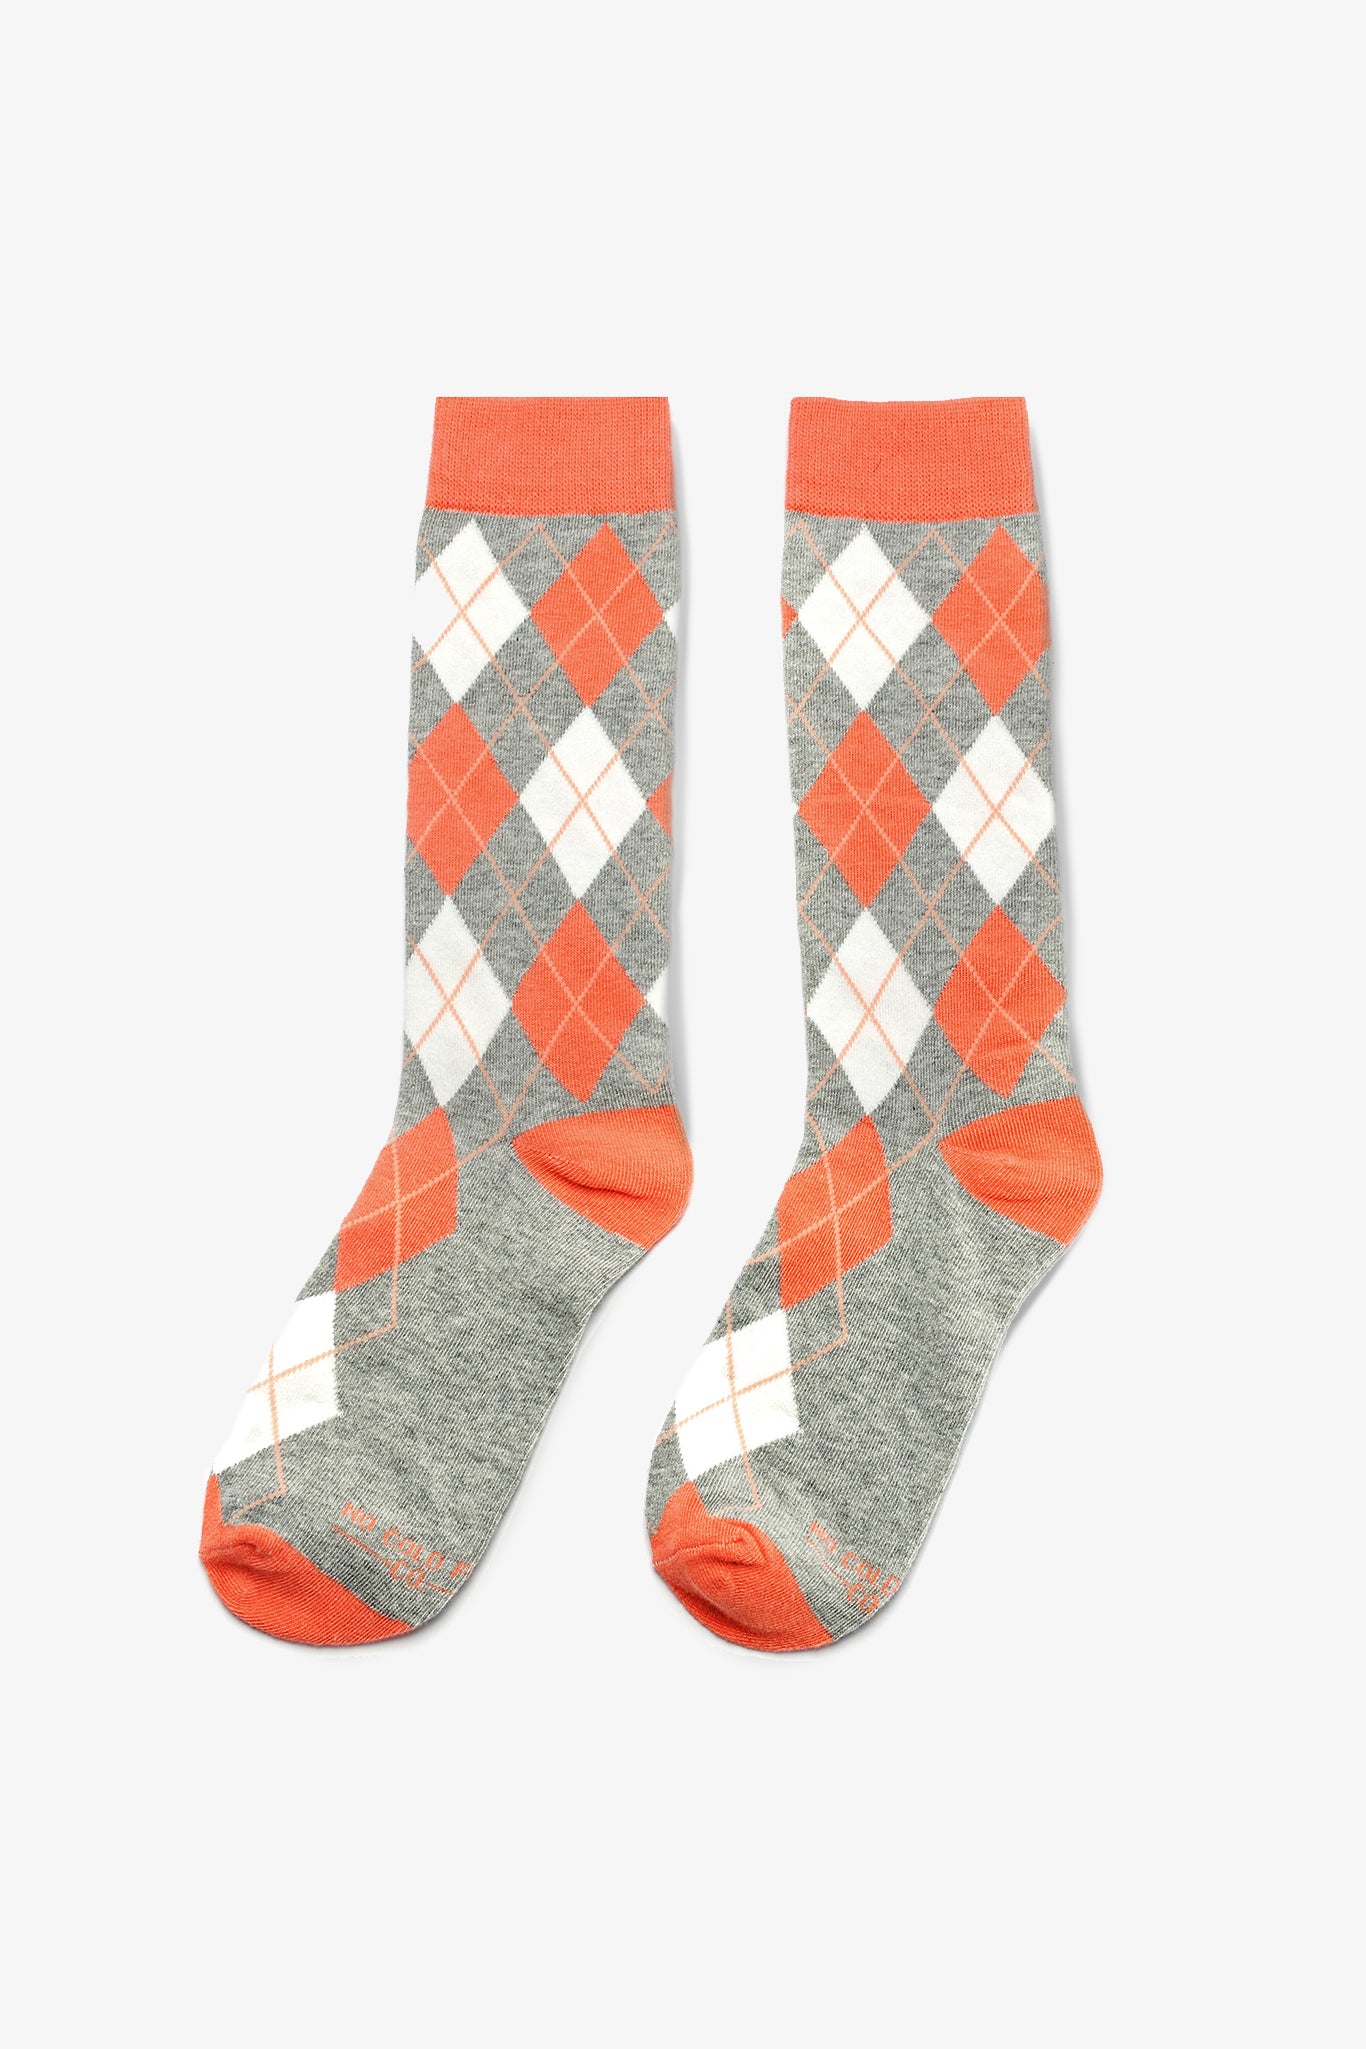 Argyle Groomsmen Socks By No Cold Feet - Coral